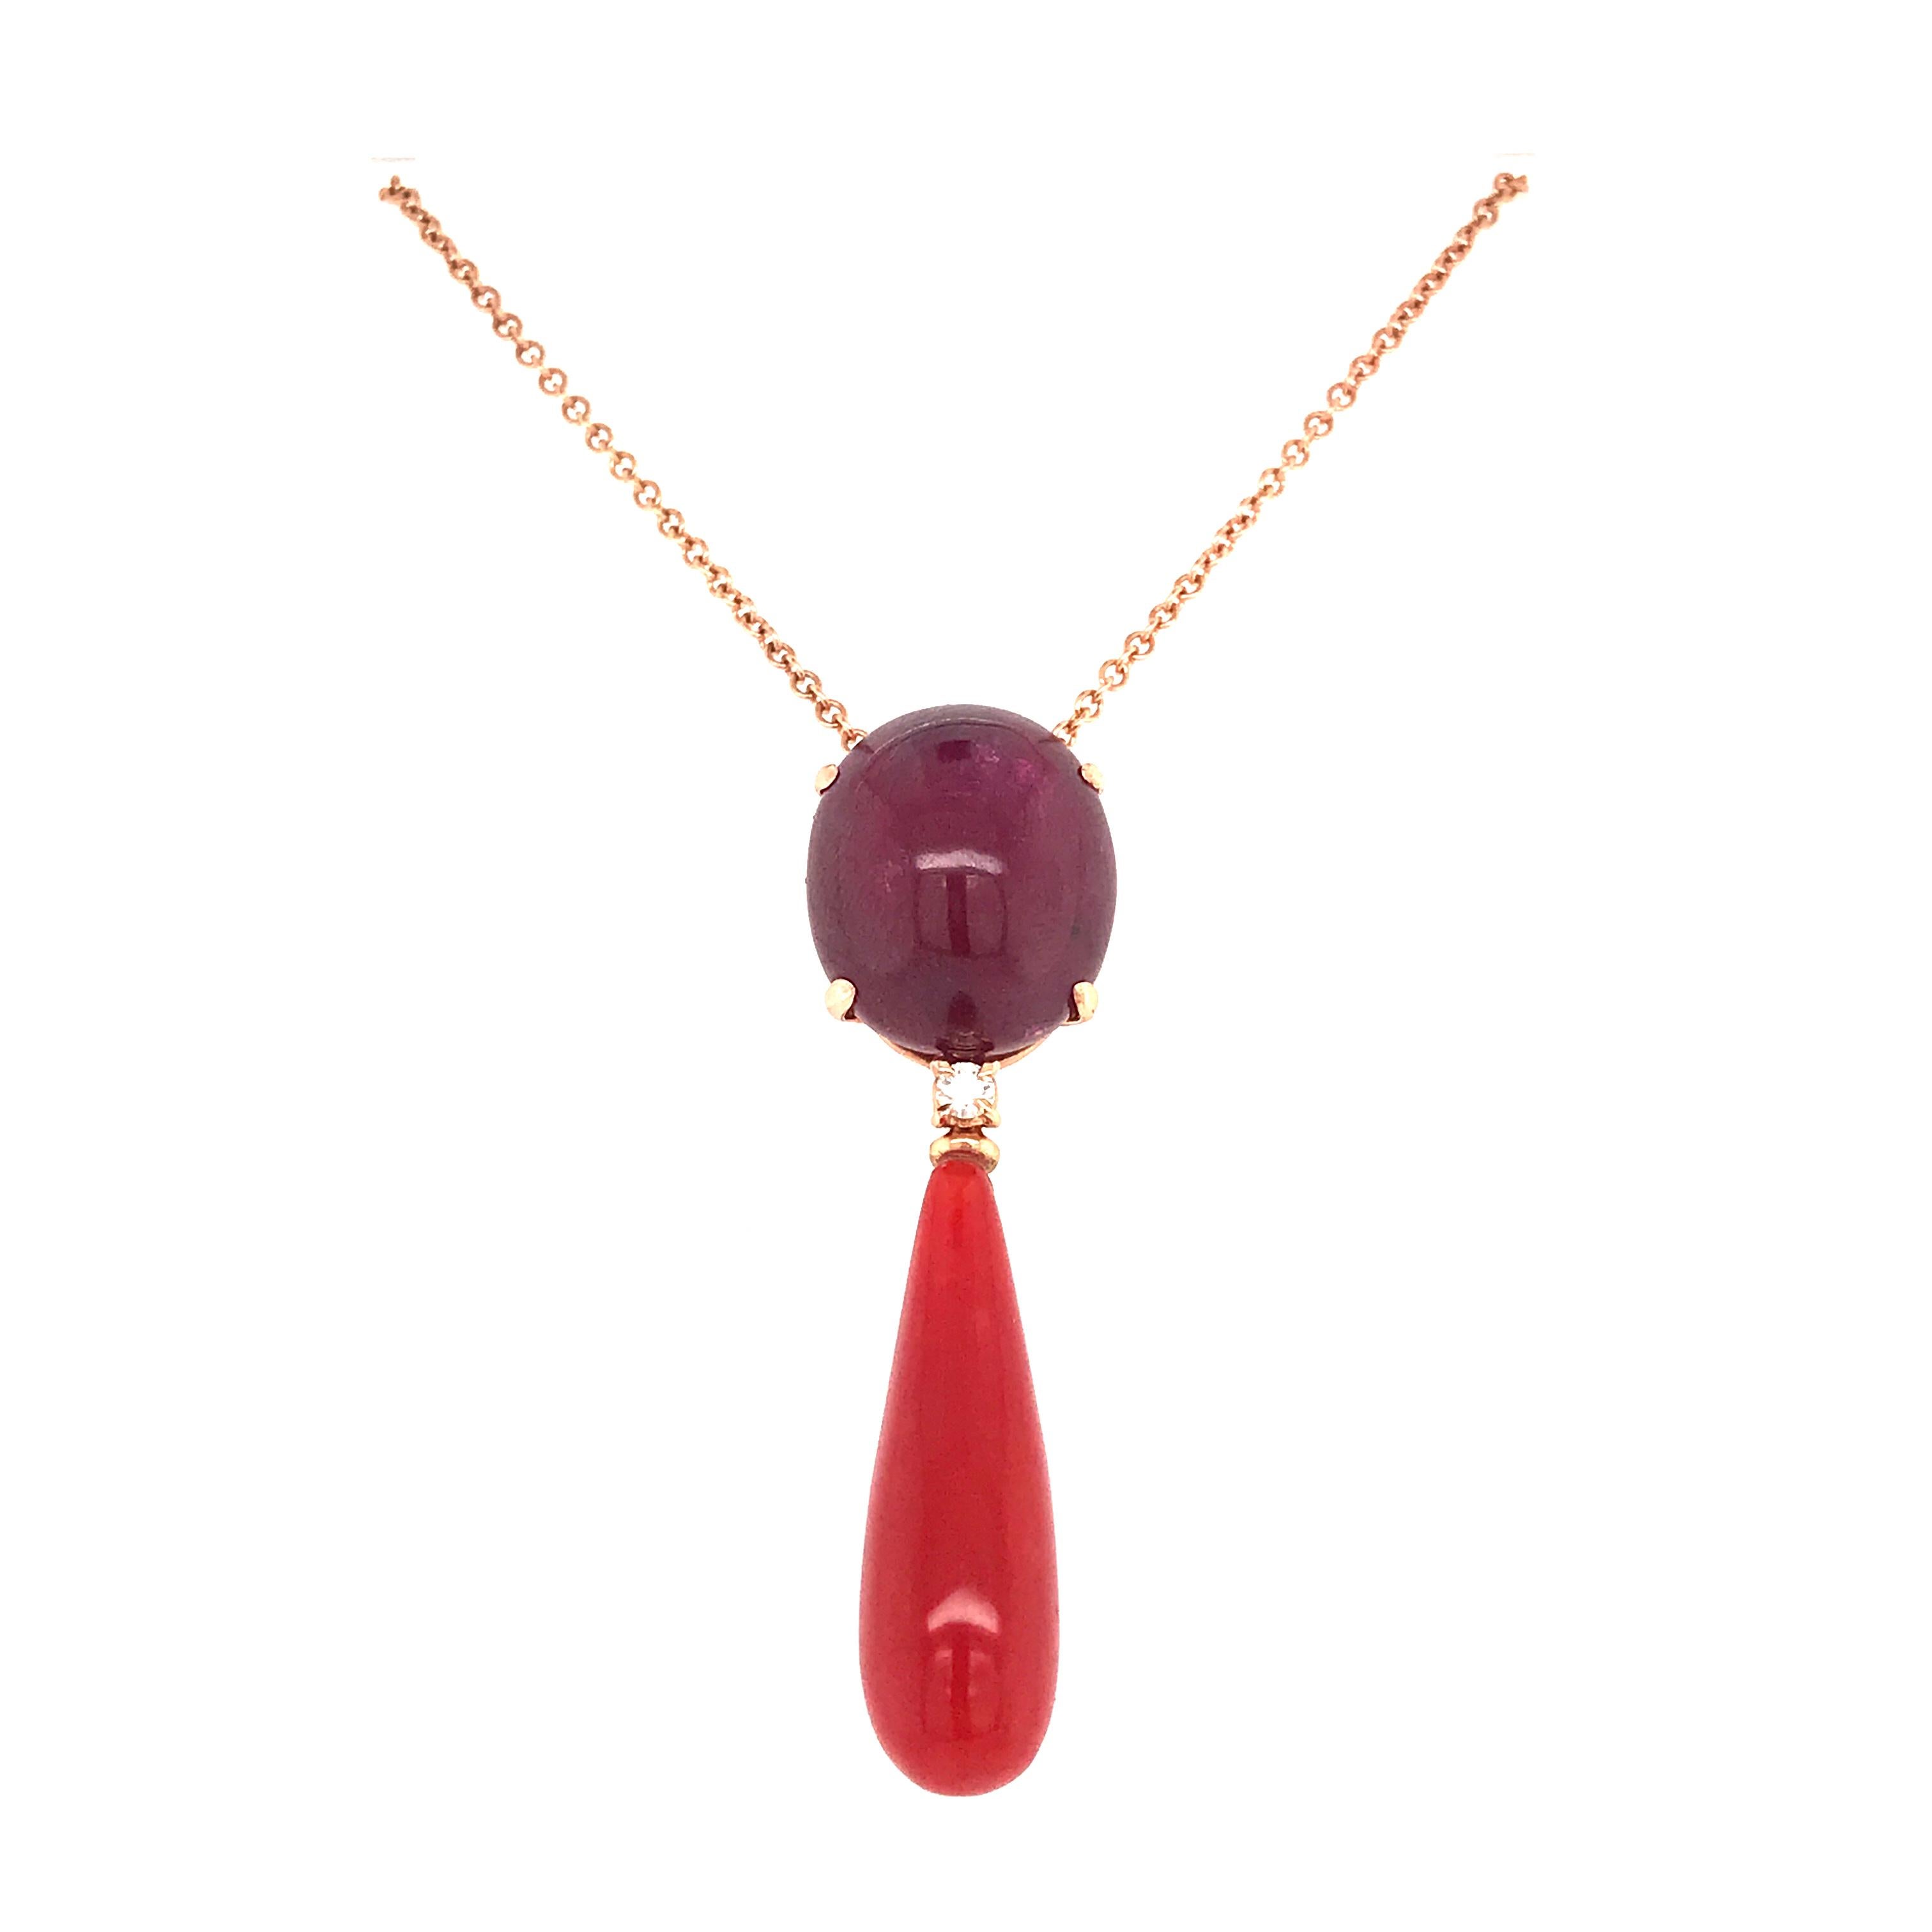 Stunning ruby glass pendant necklace, beautifully set with a sparkling diamond and dazzling coral. Every detail of this jewel is meticulously crafted to capture attention and add a touch of glamour to your style.

The ruby glass, carefully filed to